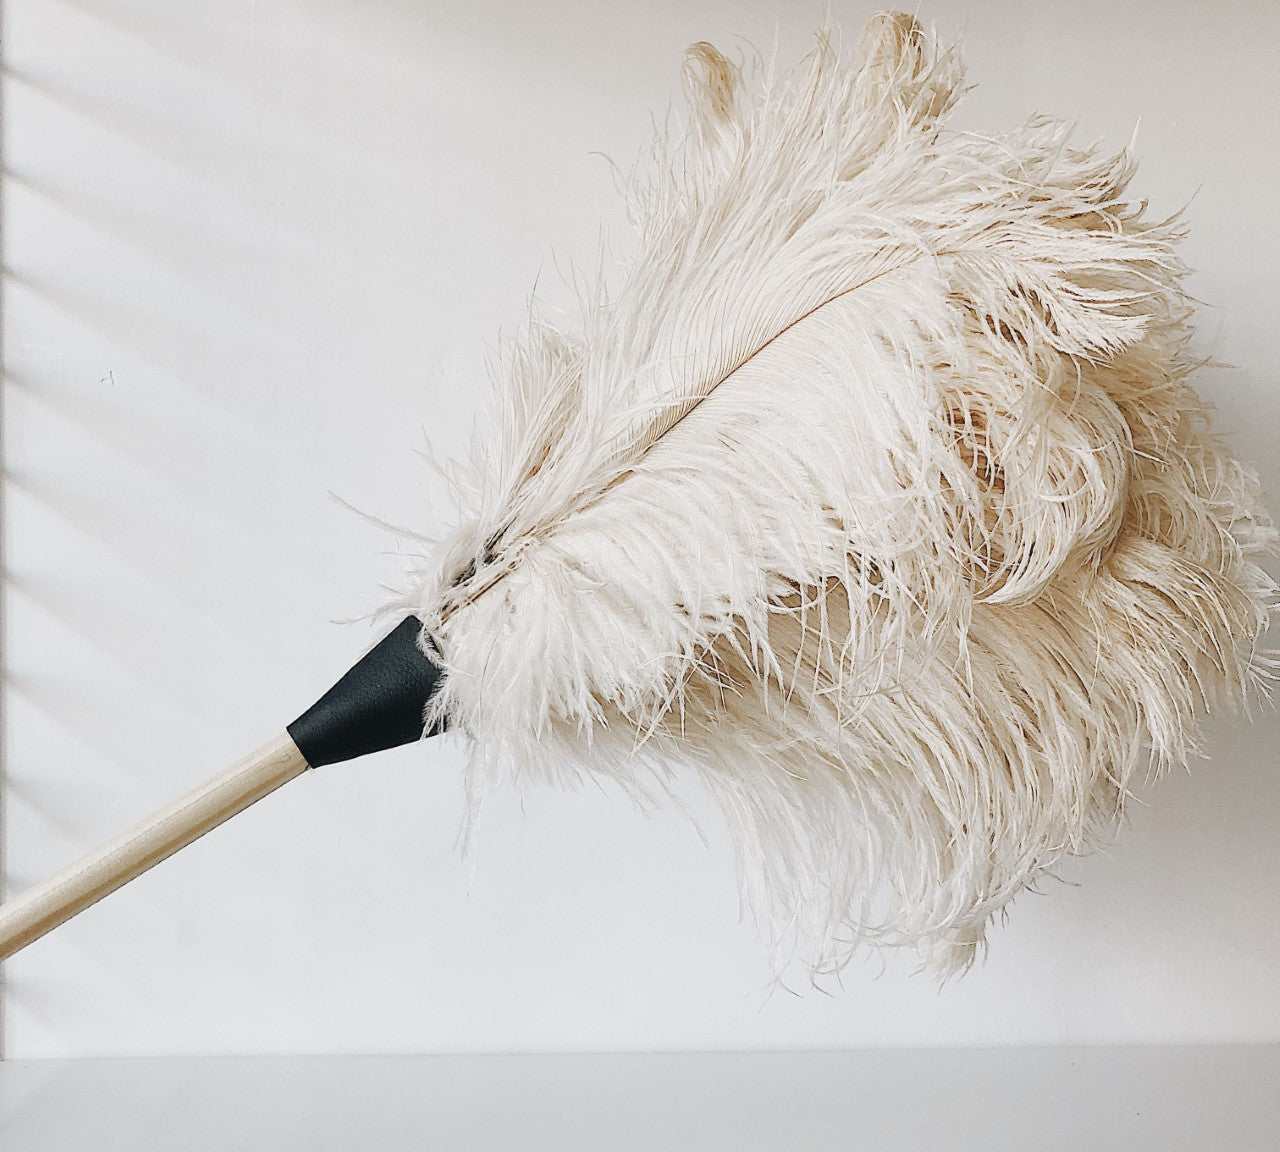 ostrich feather duster - Tea and Kate